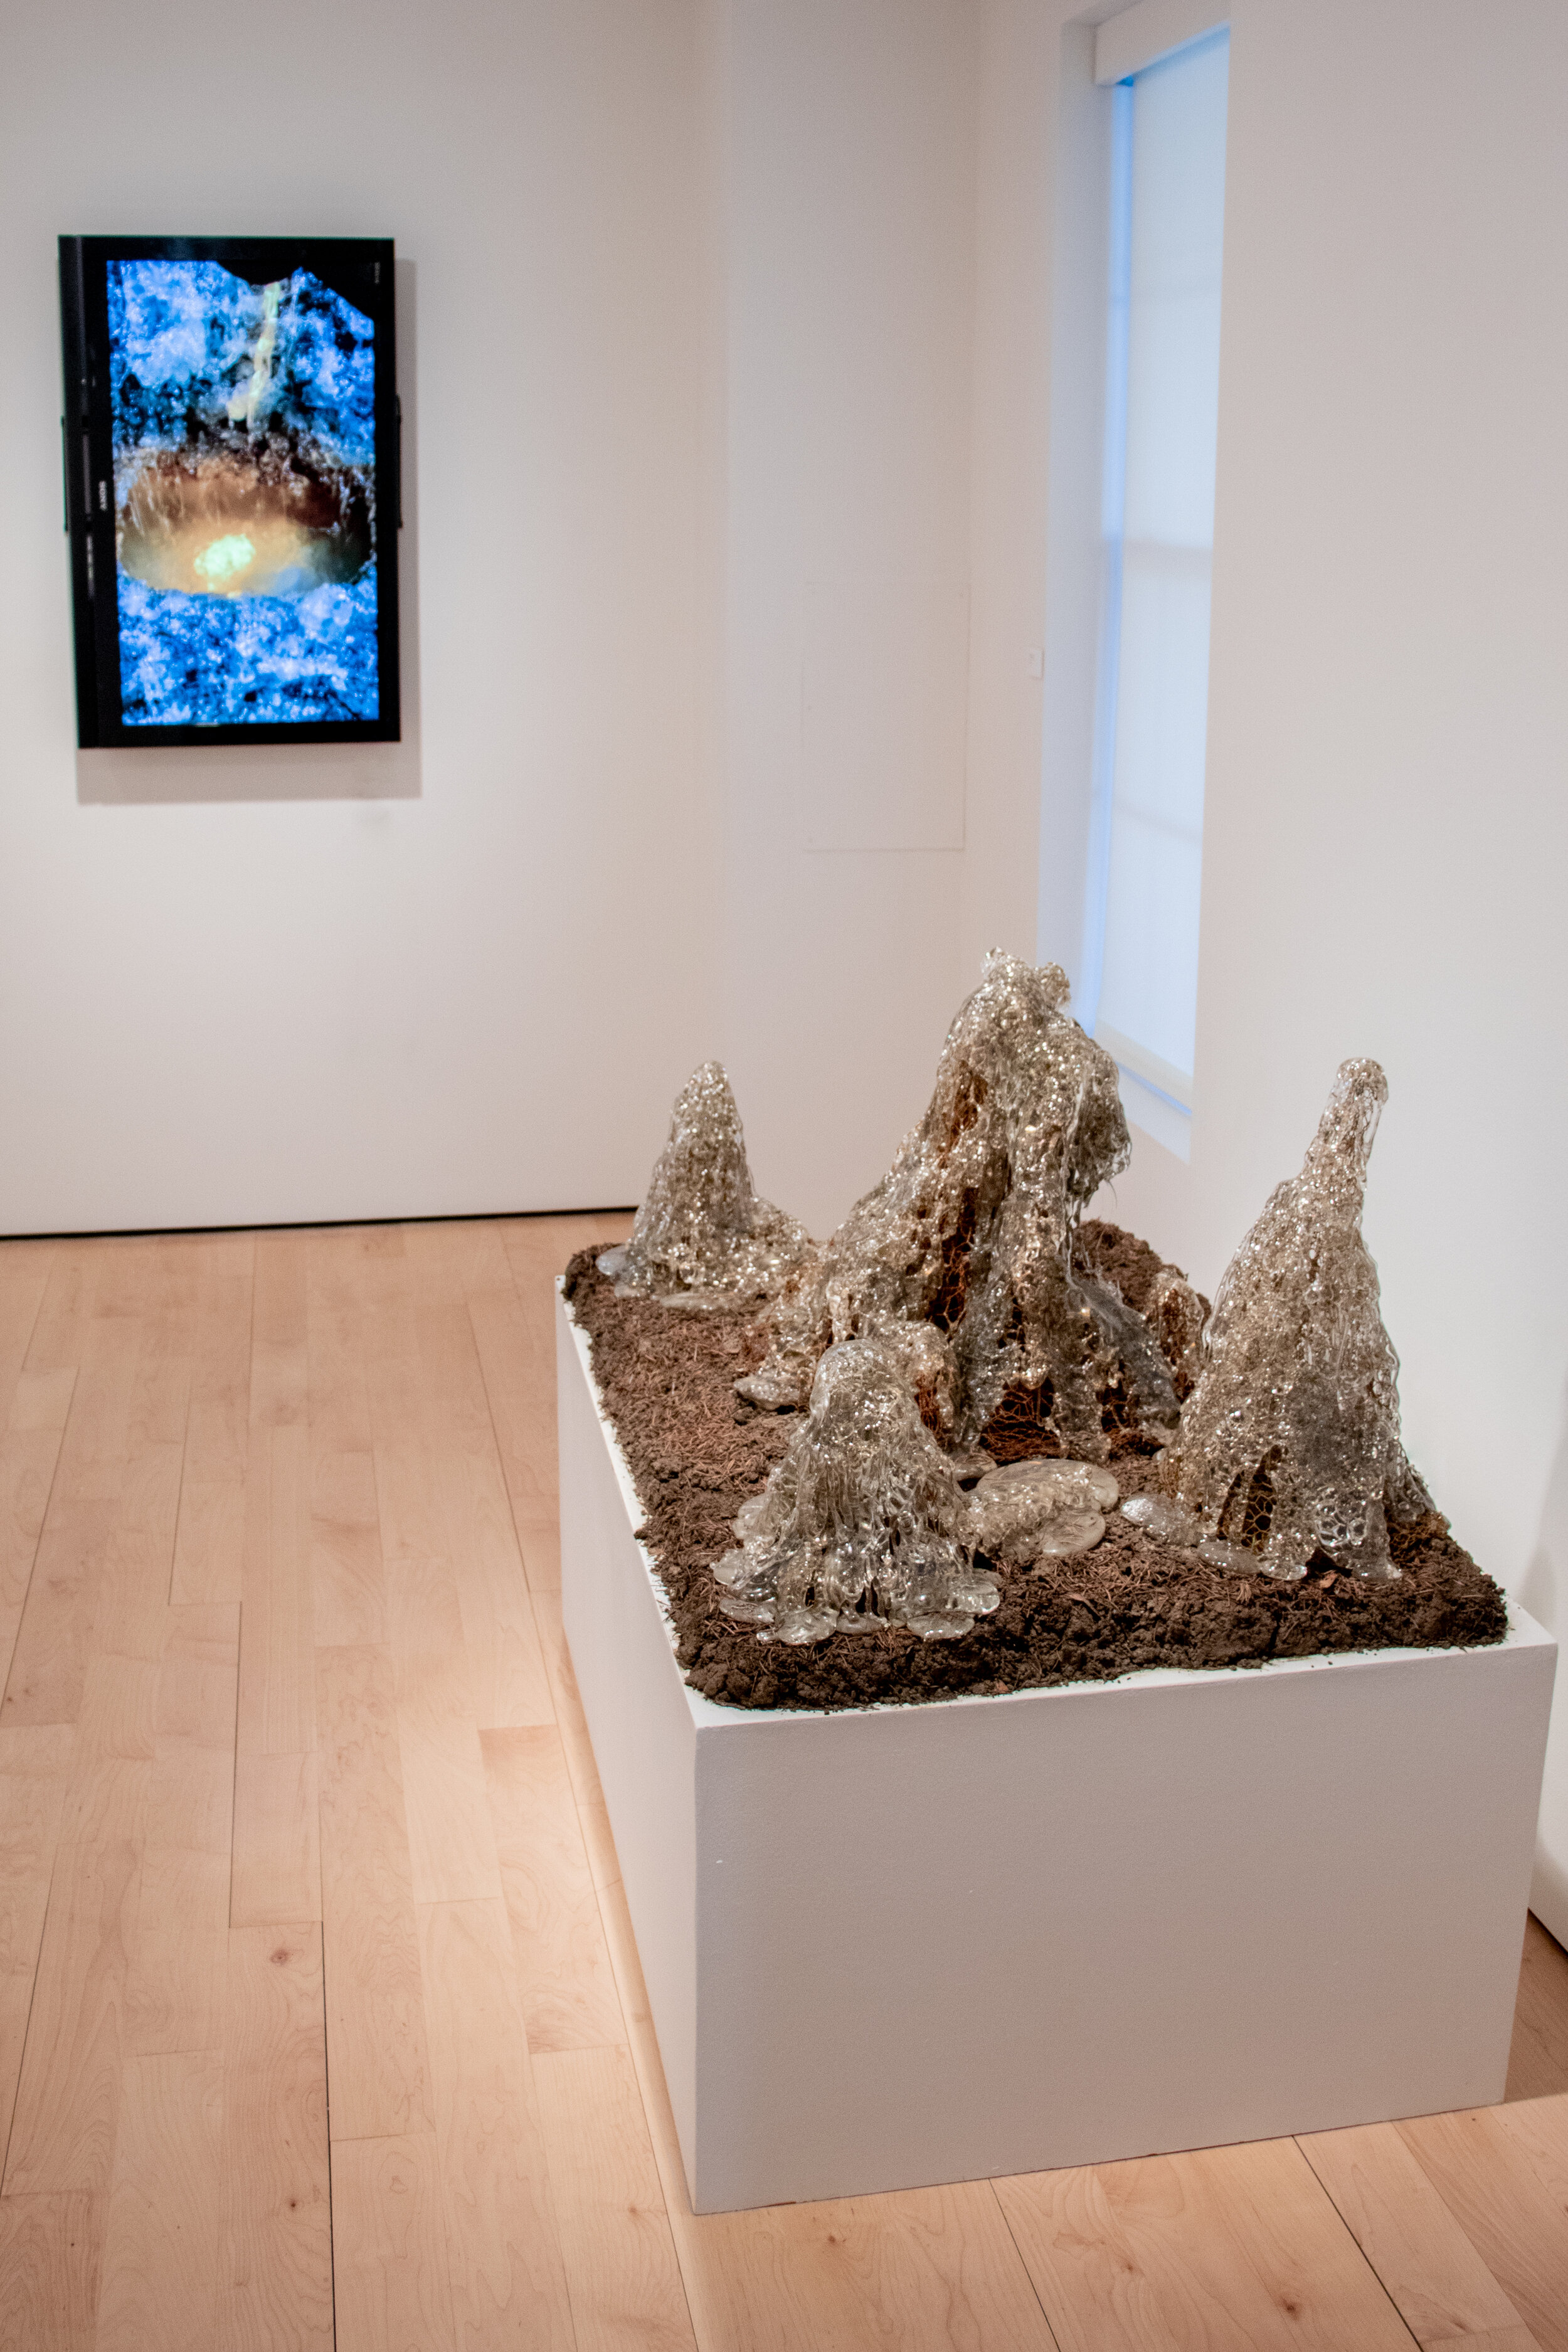  Andrew Erdos’ multi-disciplinary works often combine cast and blown glass, video, photography and installation. Erdos has exhibited internationally at venues including The Toledo Museum of Art; Corning Museum of Glass; National Center for Contempora